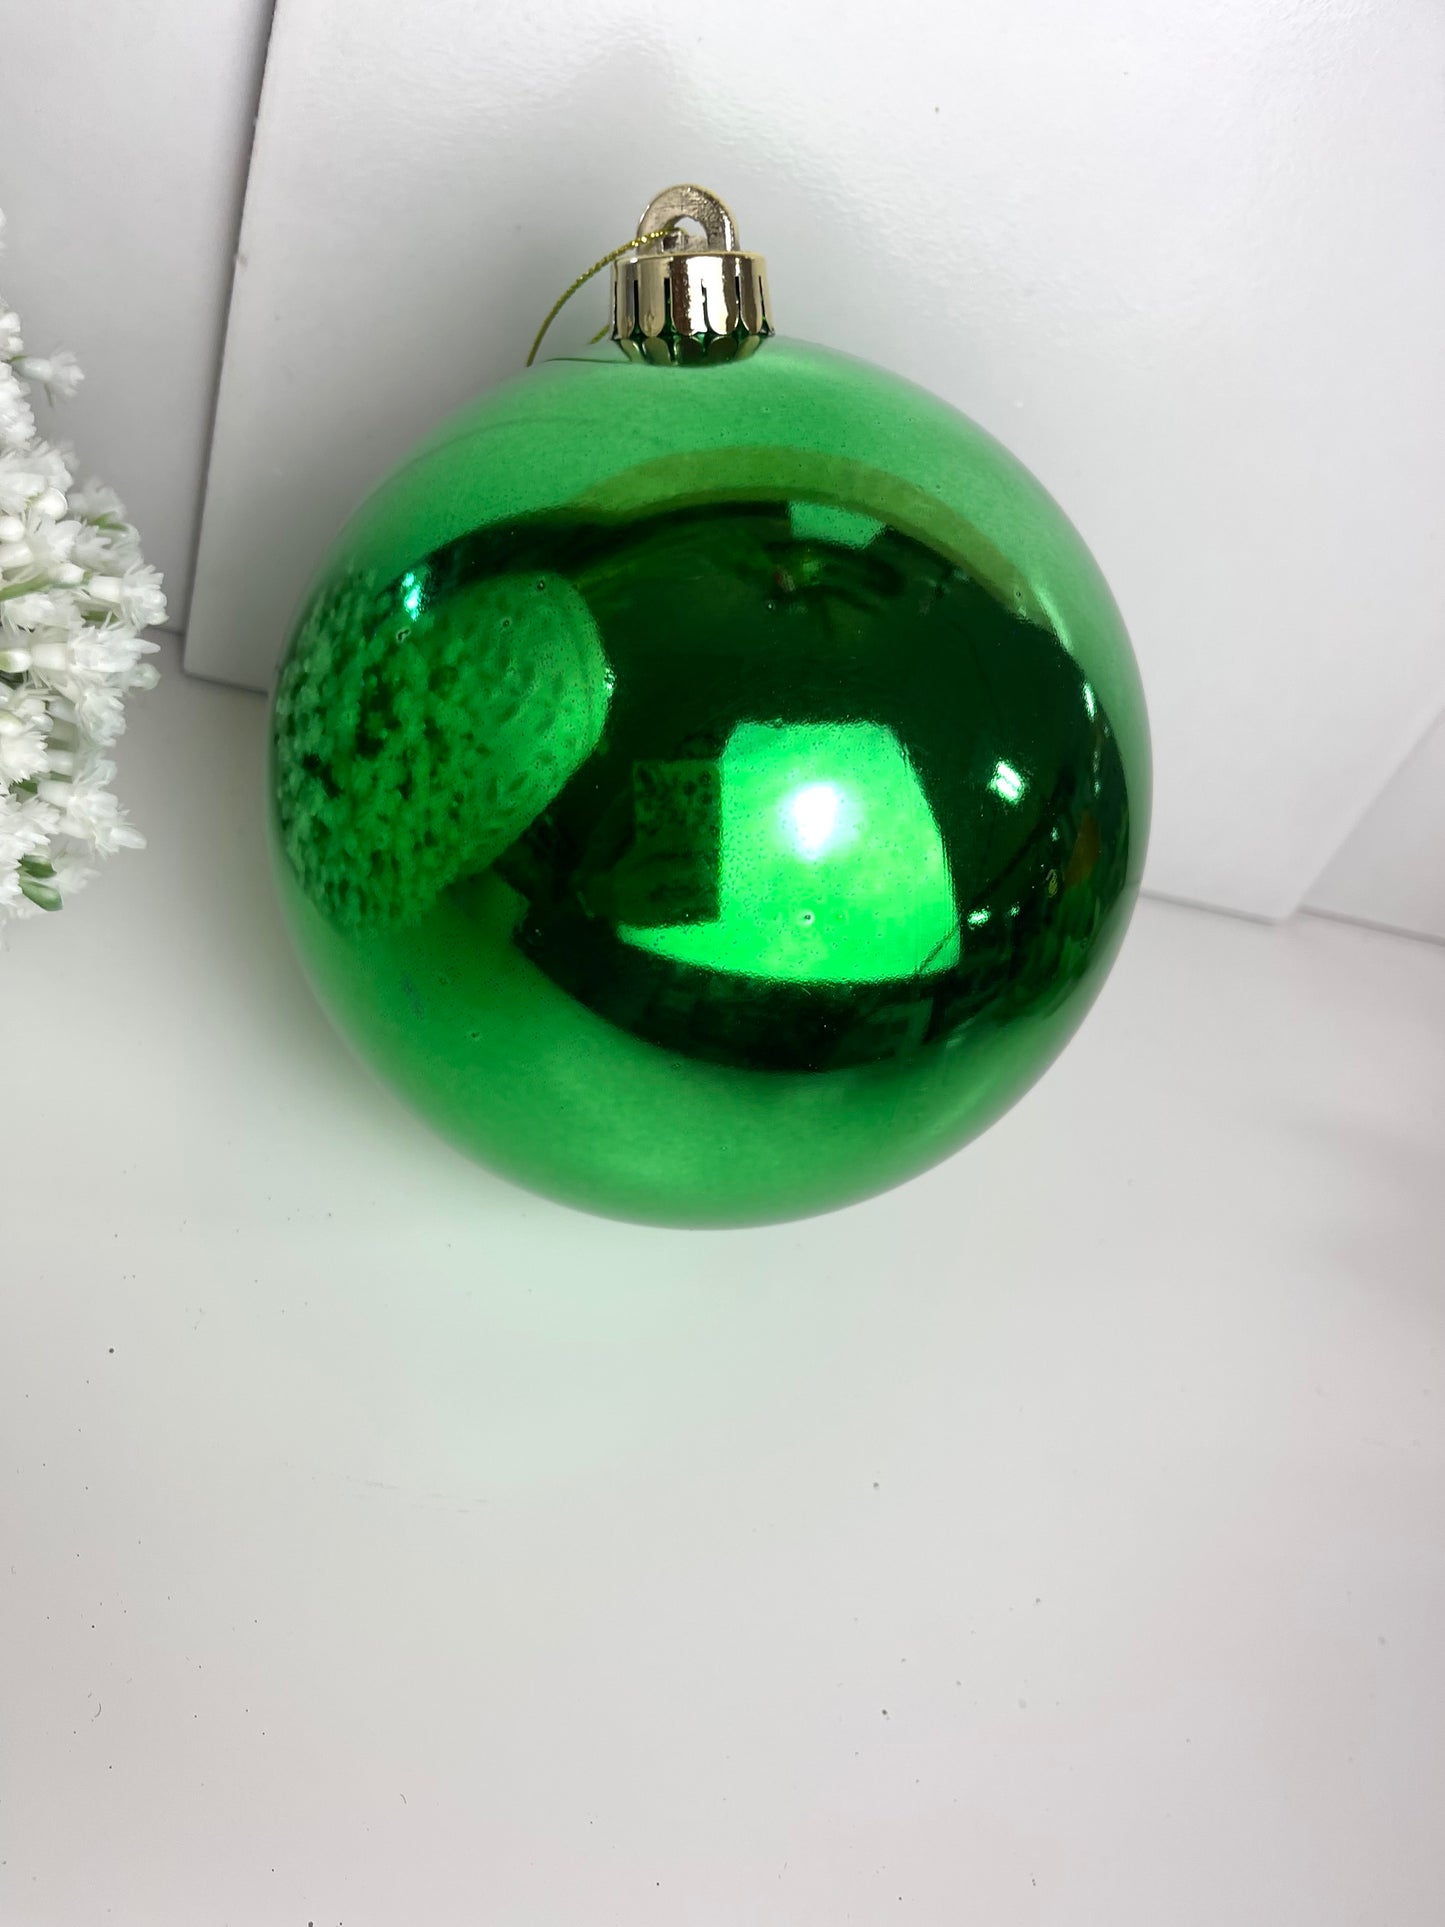 6 Inch Shiny Green Smooth Ornament Ball